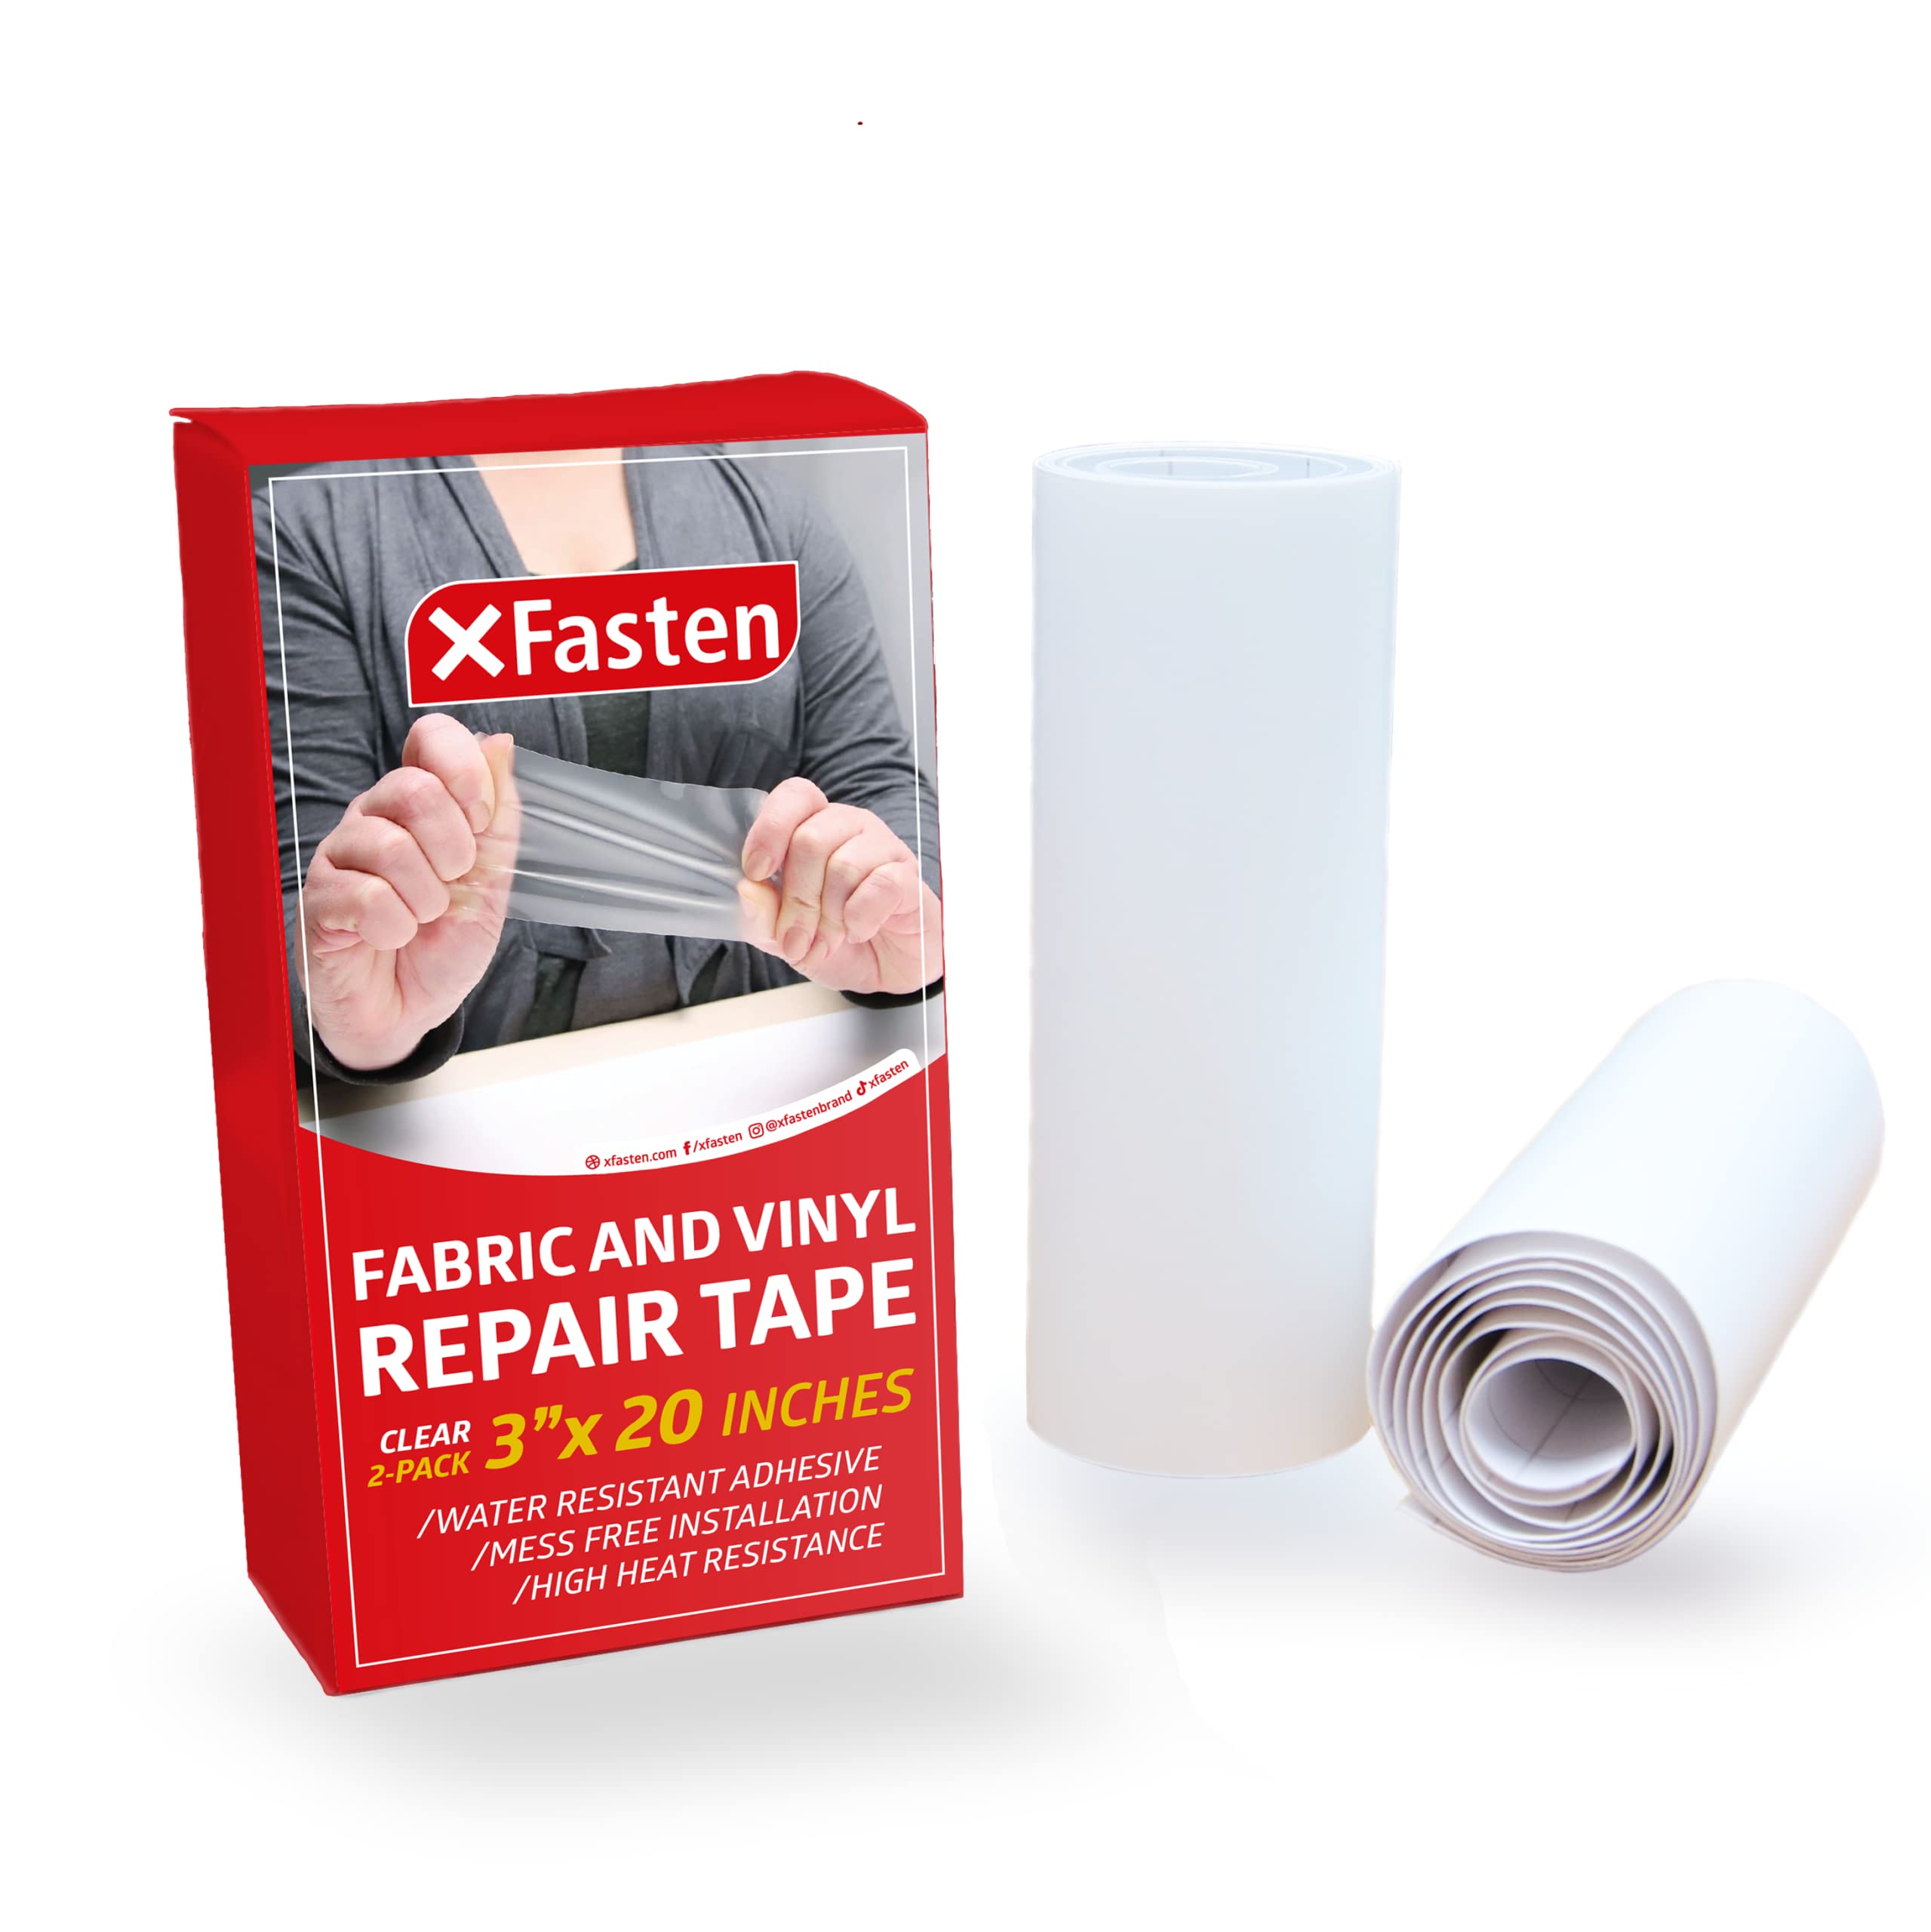 XFasten Fabric and Vinyl Repair Tape, Clear, 3-Inches by 20-Inches (2-Set),  Waterproof Vinyl Repair Hole Patch Kit for Tent, Exercise Ball, Kayak,  Inflatable Bed, Pool Float, and Airbed Mattress